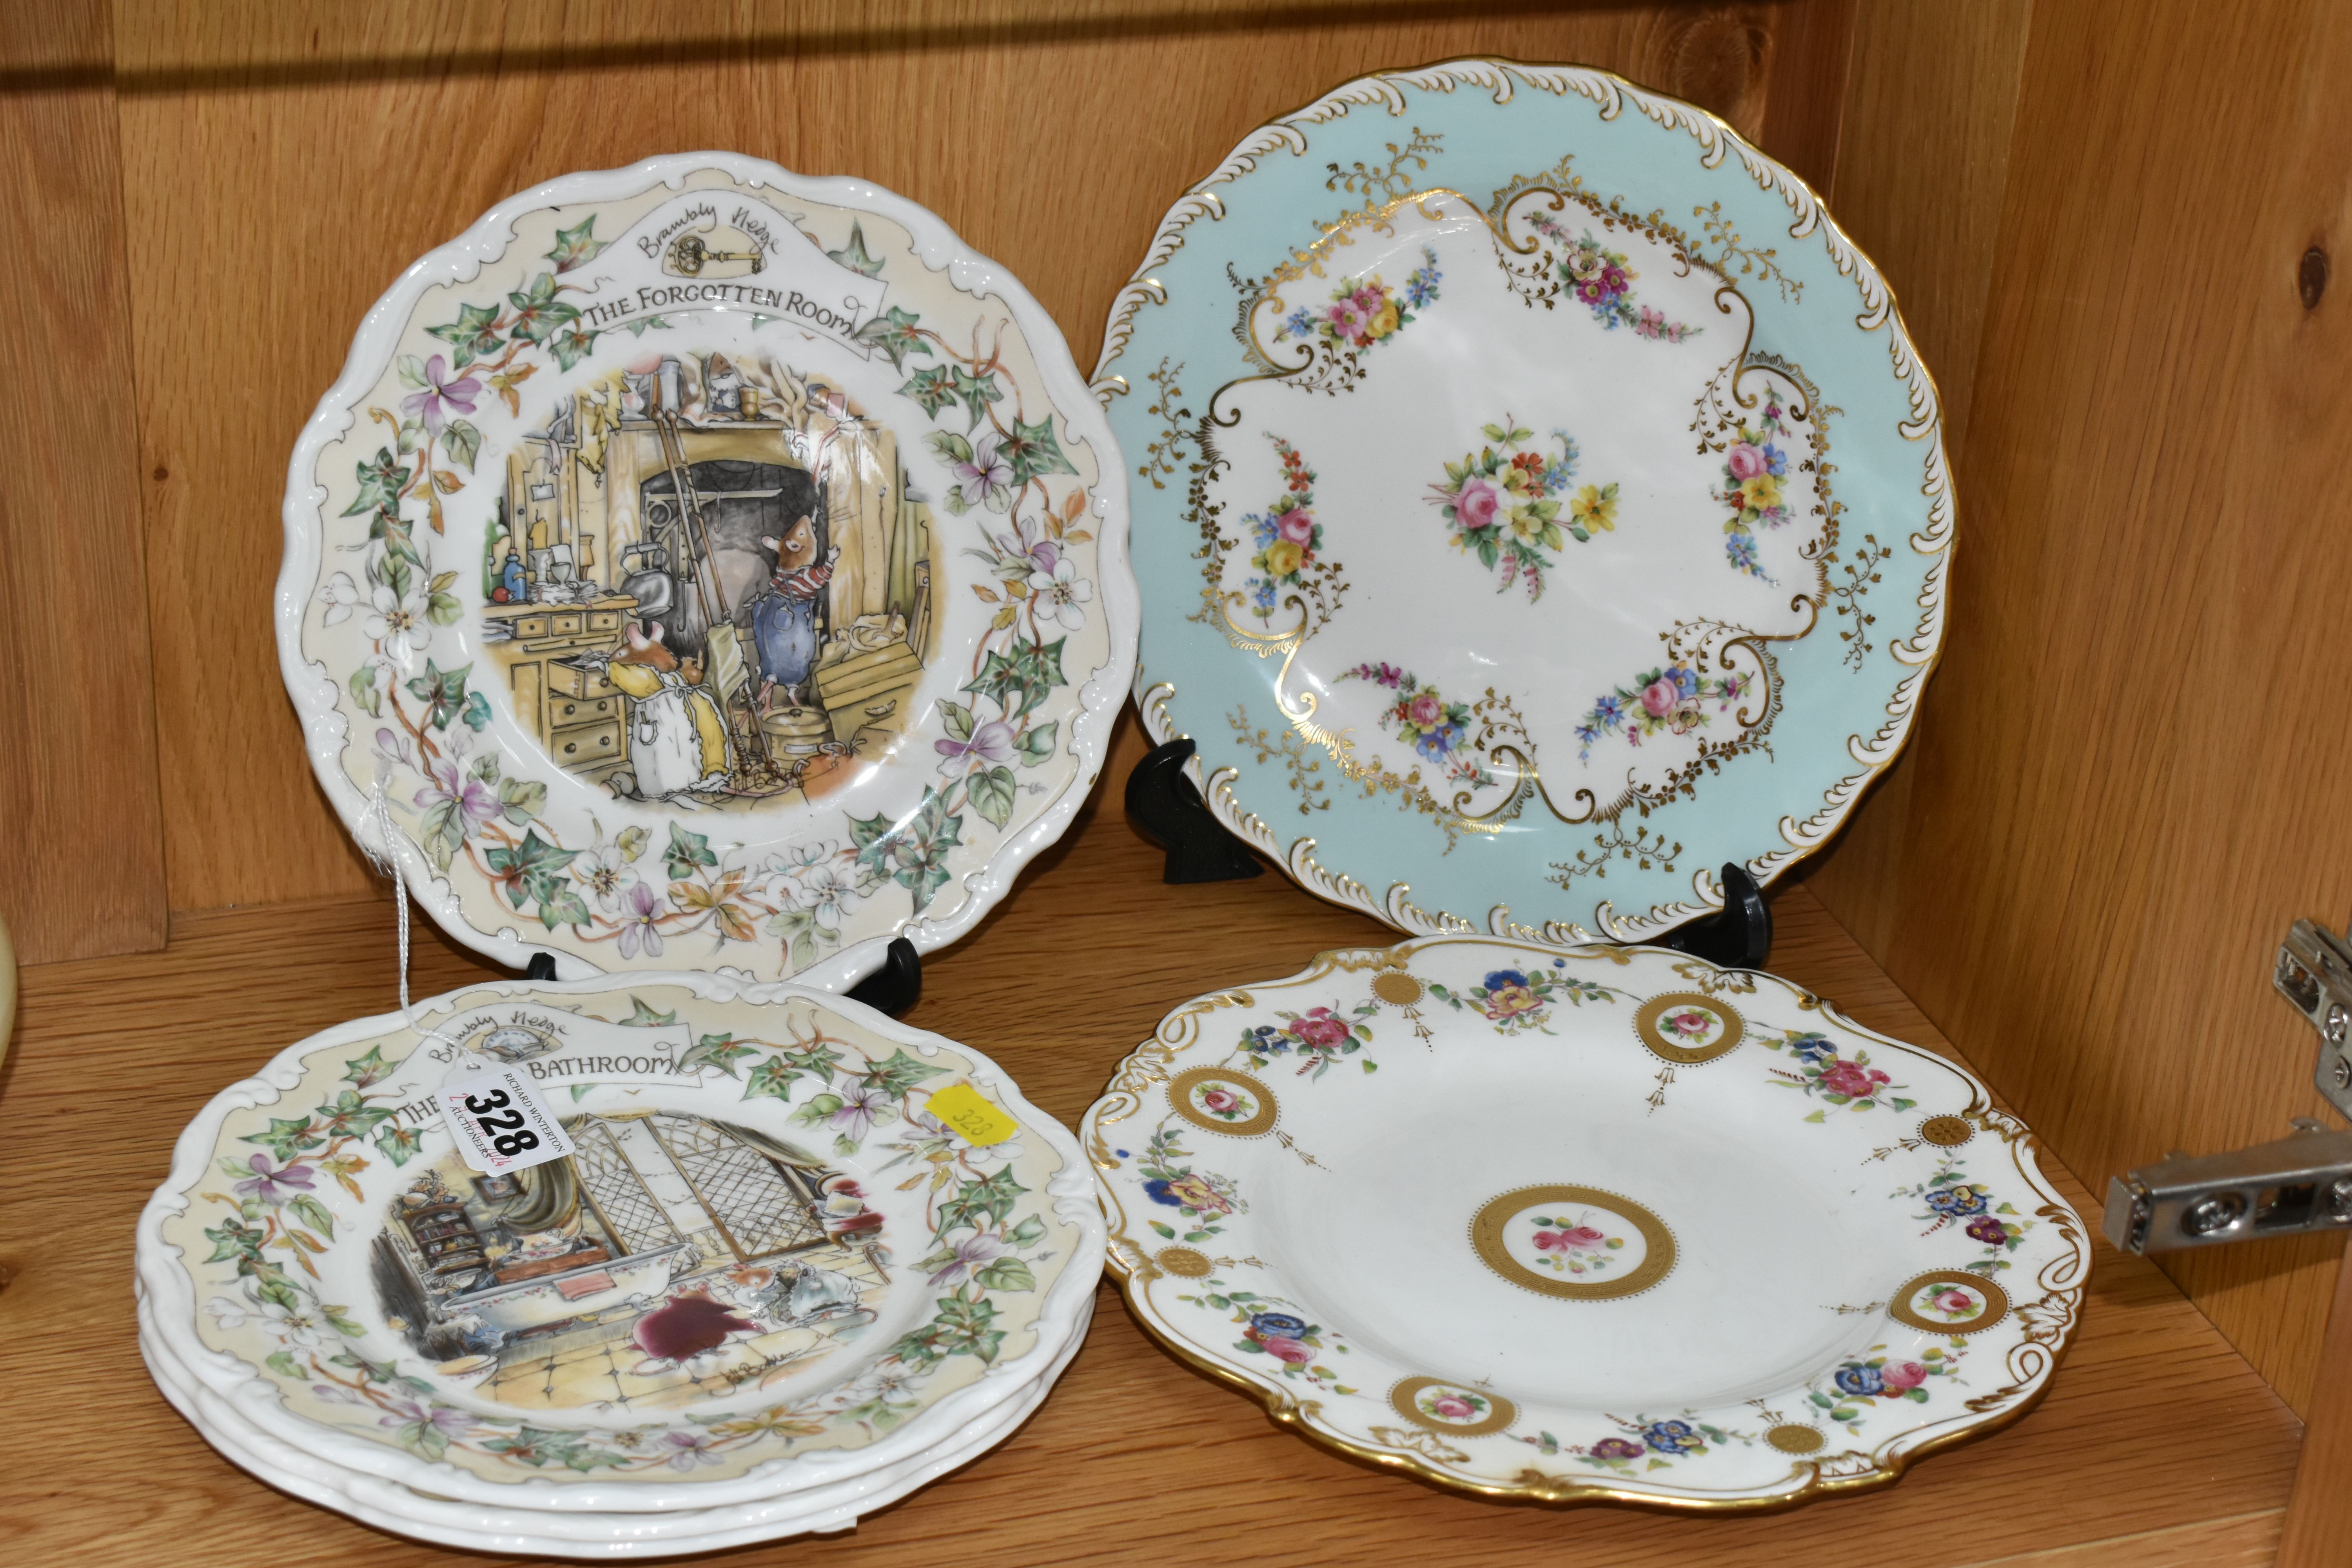 FOUR ROYAL DOULTON 'BRAMBLY HEDGE' PLATES AND TWO MINTON PLATES, comprising Royal Doulton Brambly